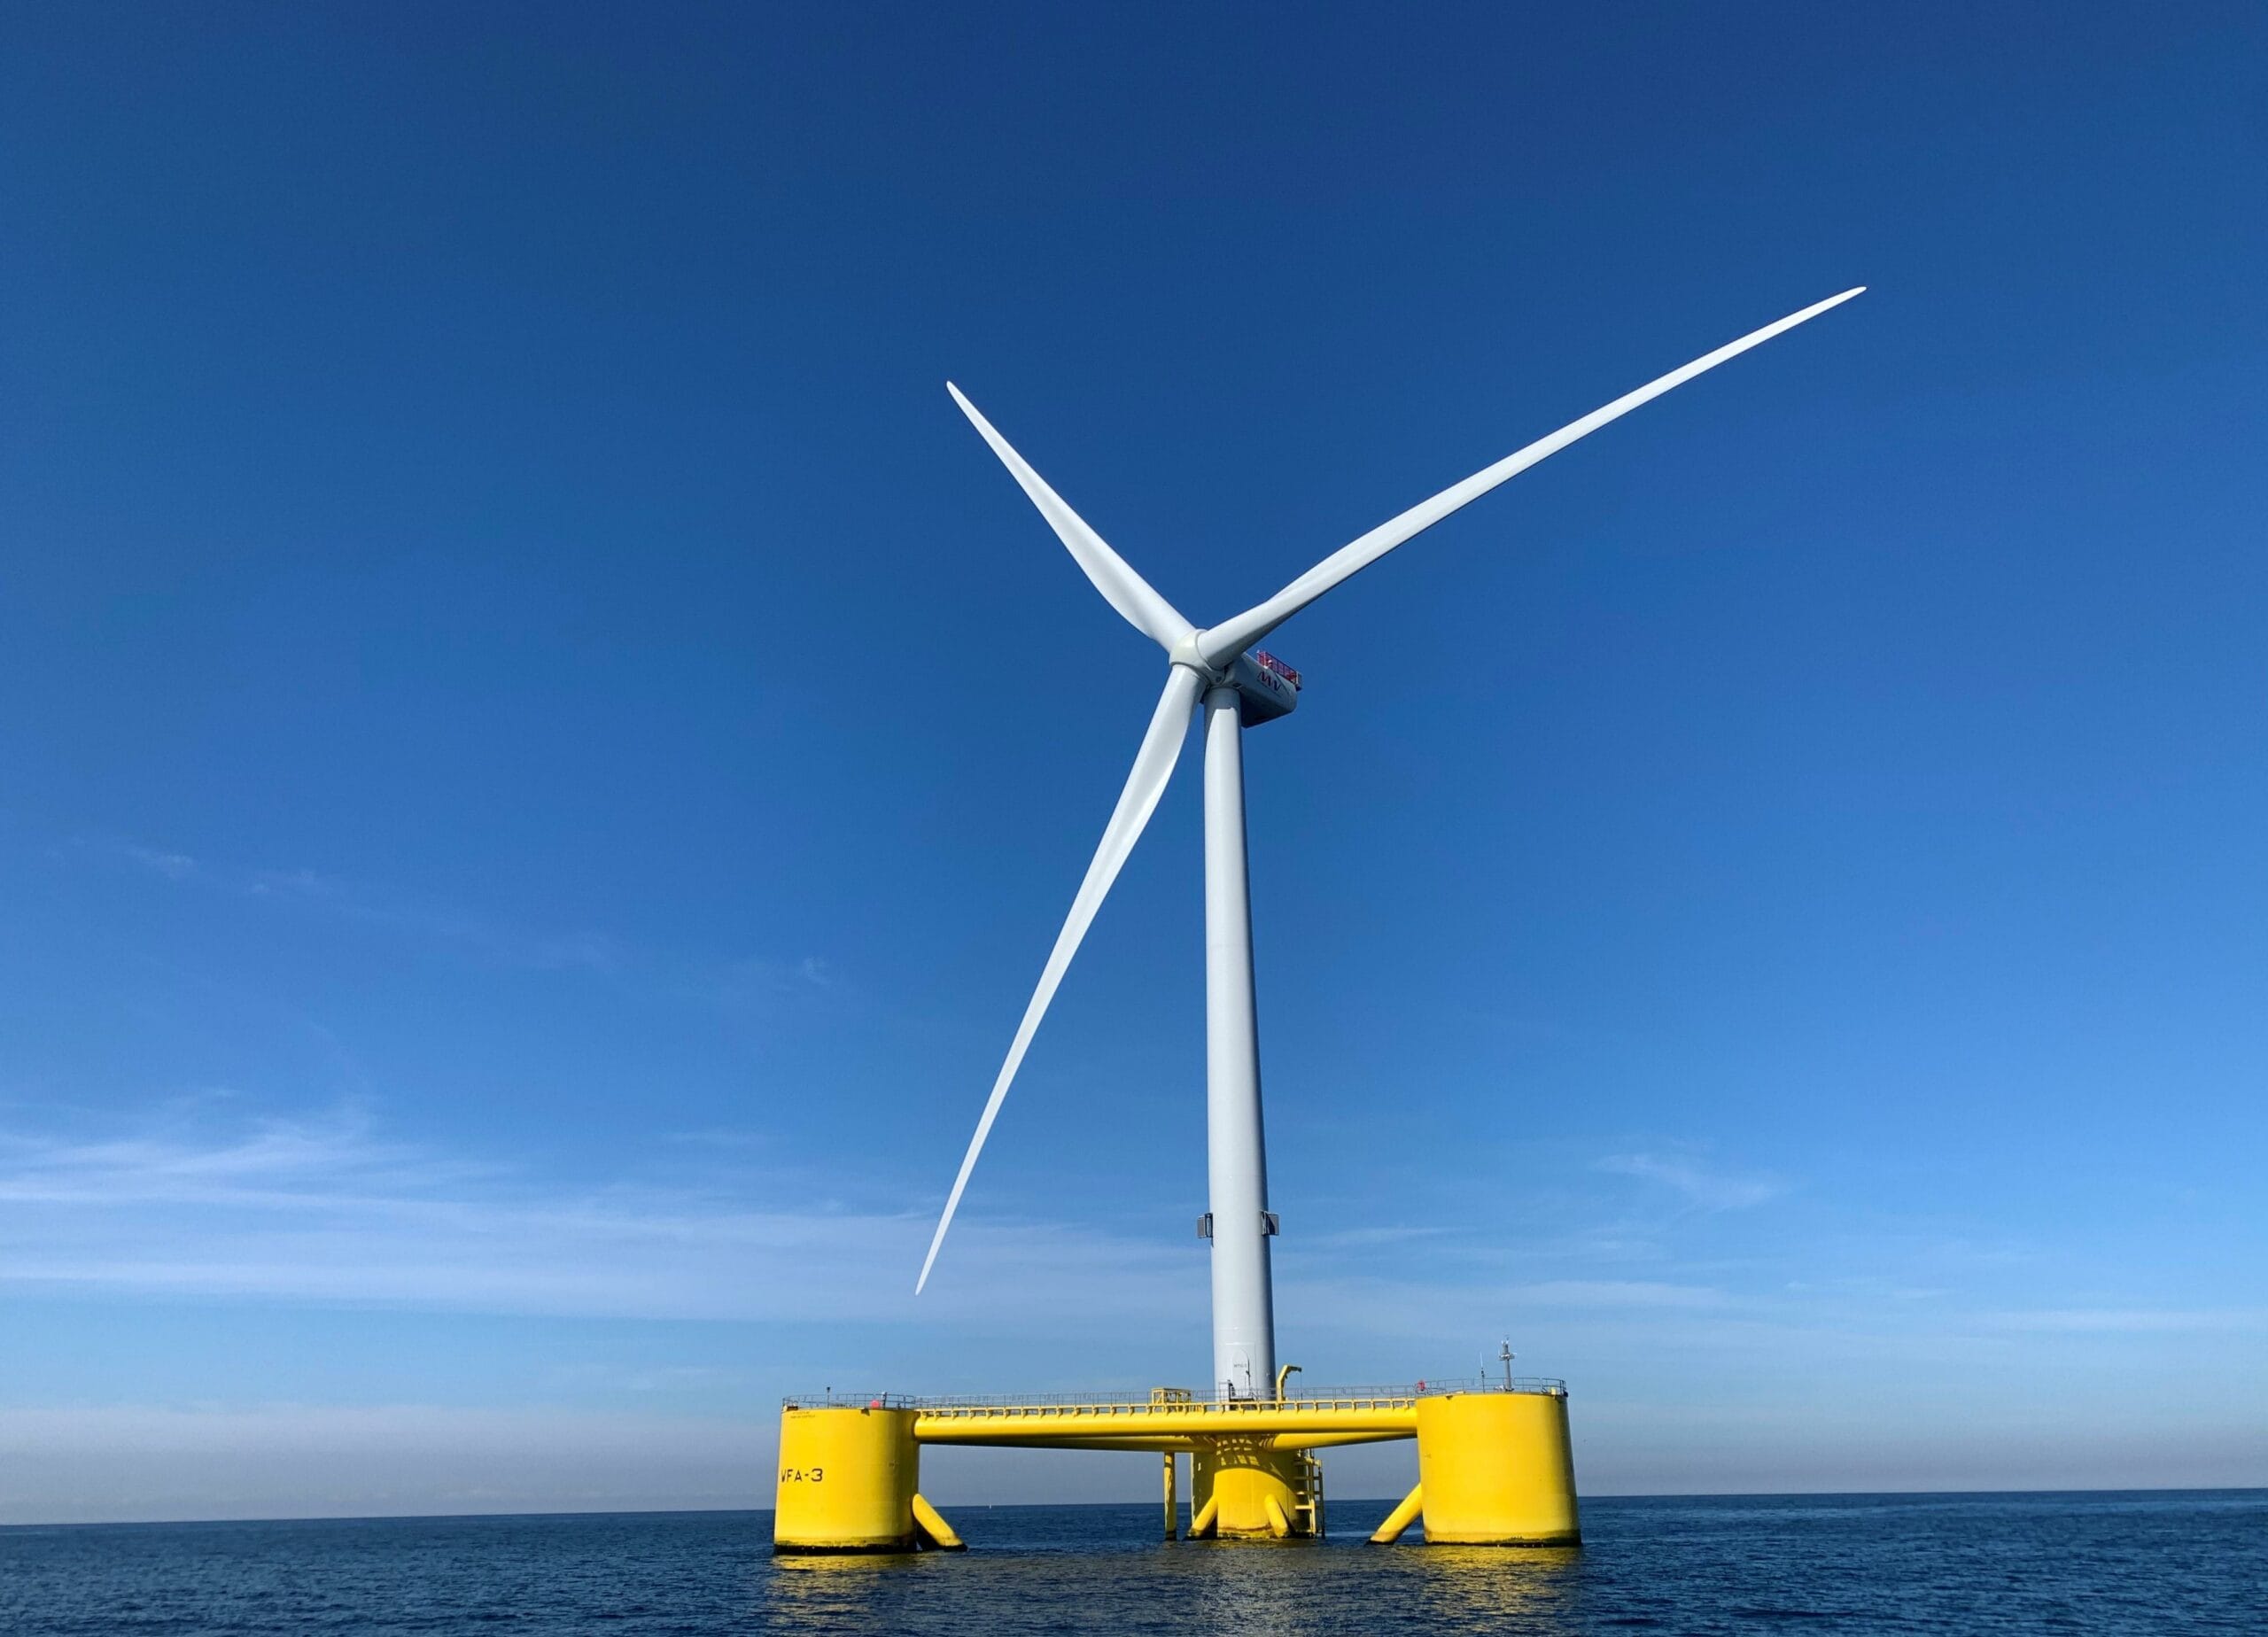 Ocean Winds awarded with 2 GW in California Wind Energy Lease 